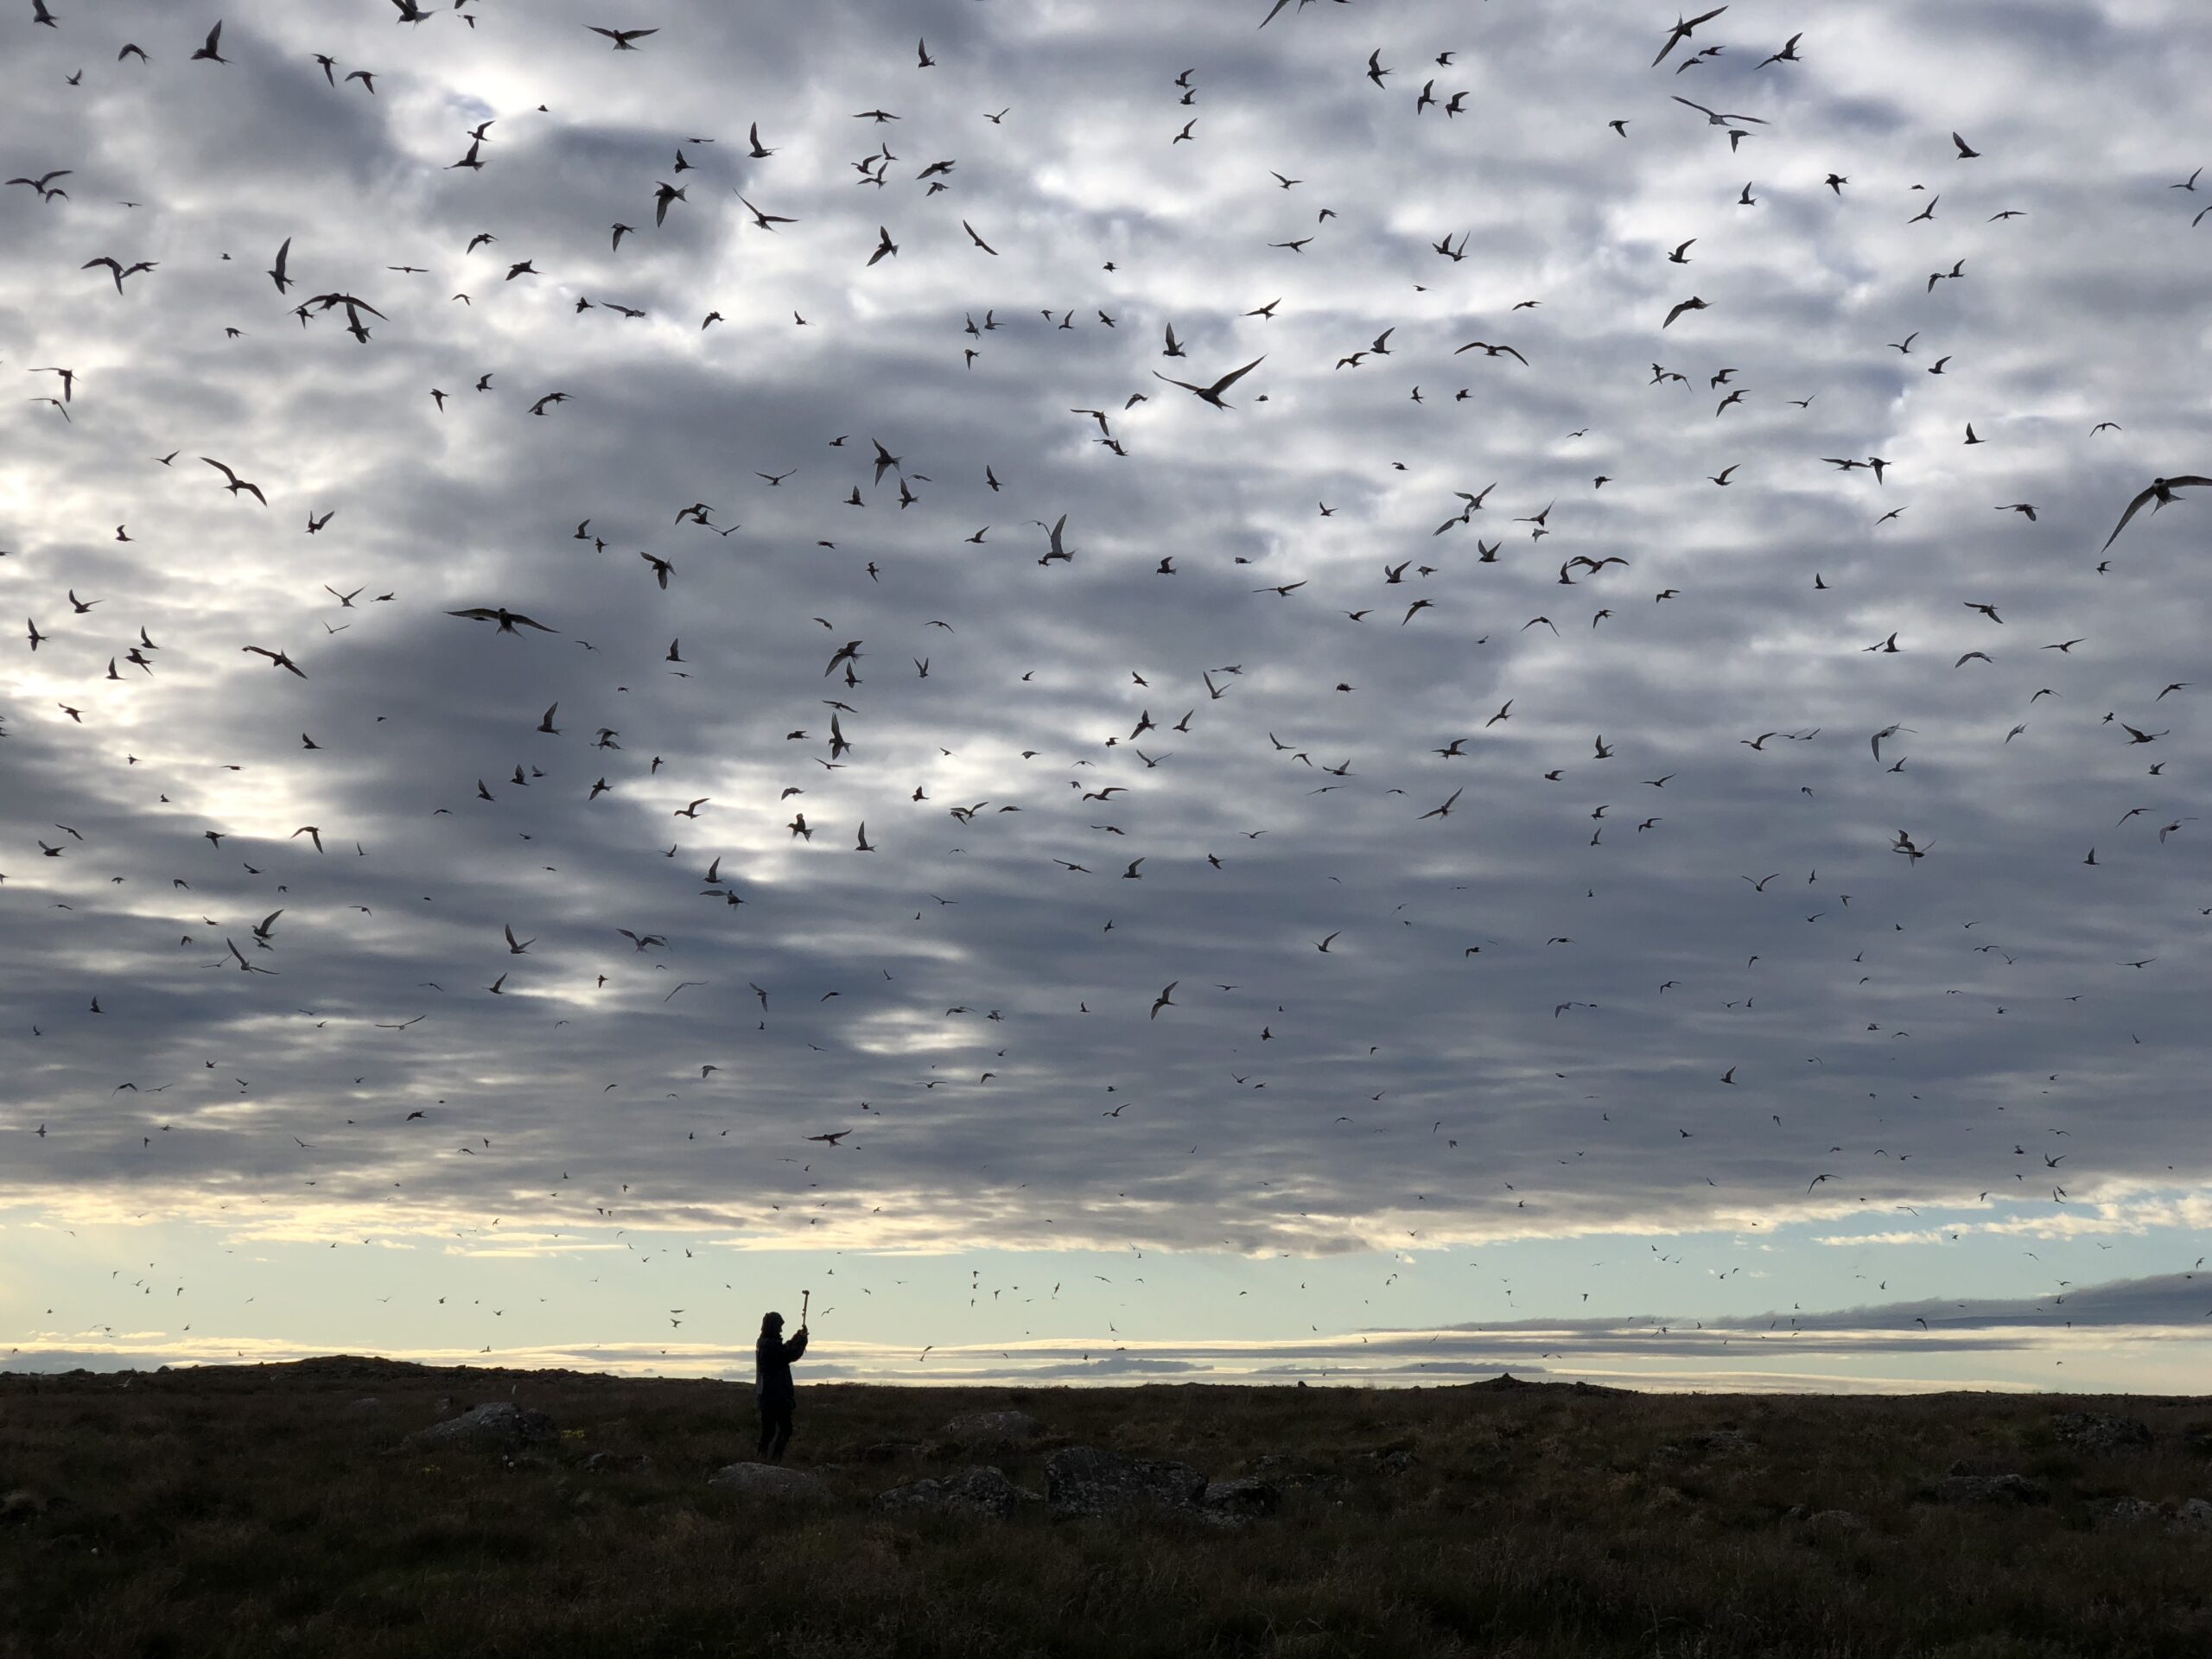 arctic terns flying against clouds with person silhouetted against background